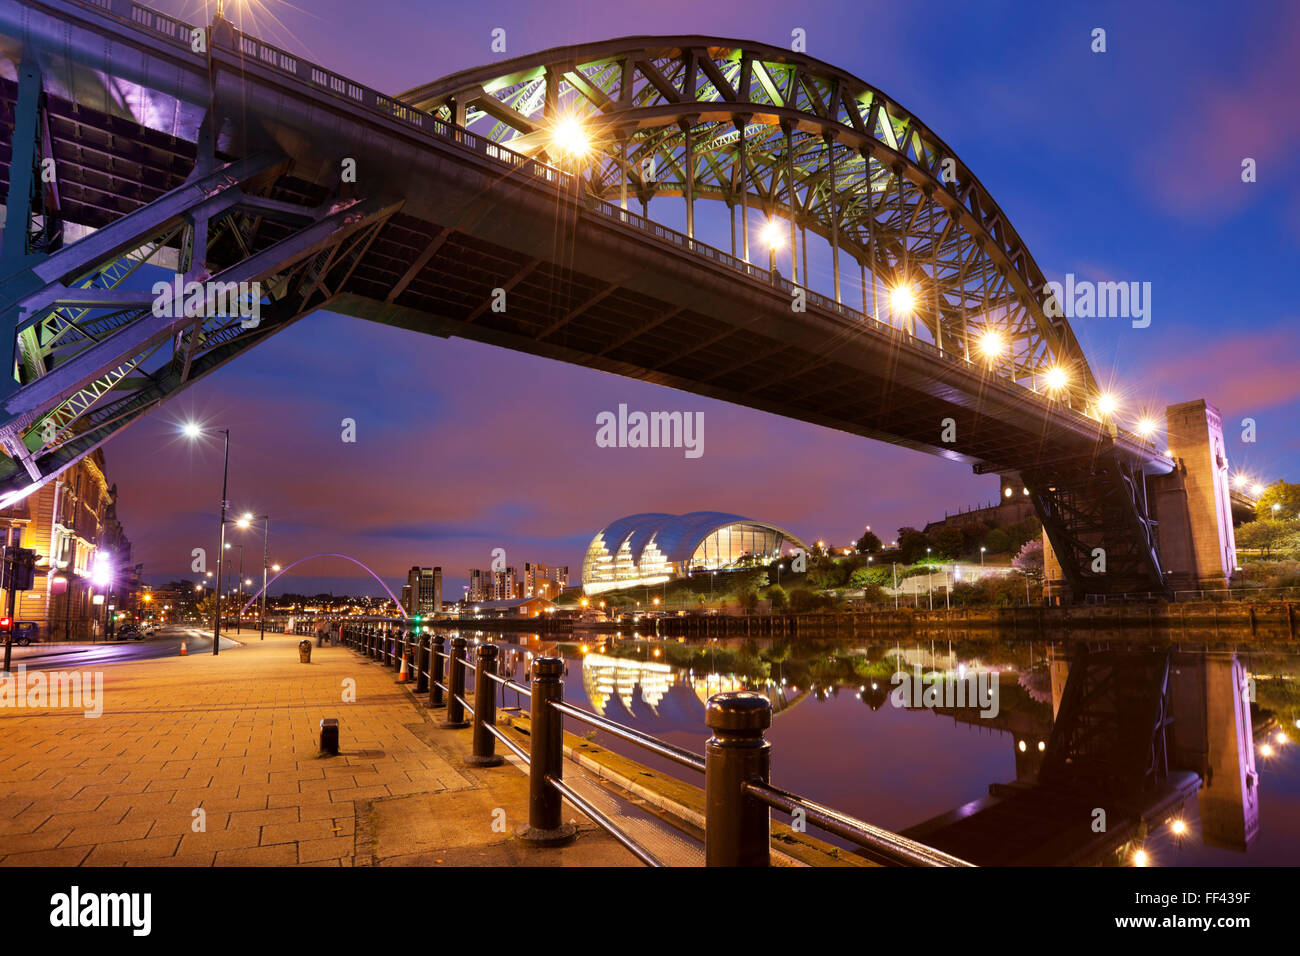 The Tyne Bridge over the river Tyne in Newcastle, England at night. Stock Photo